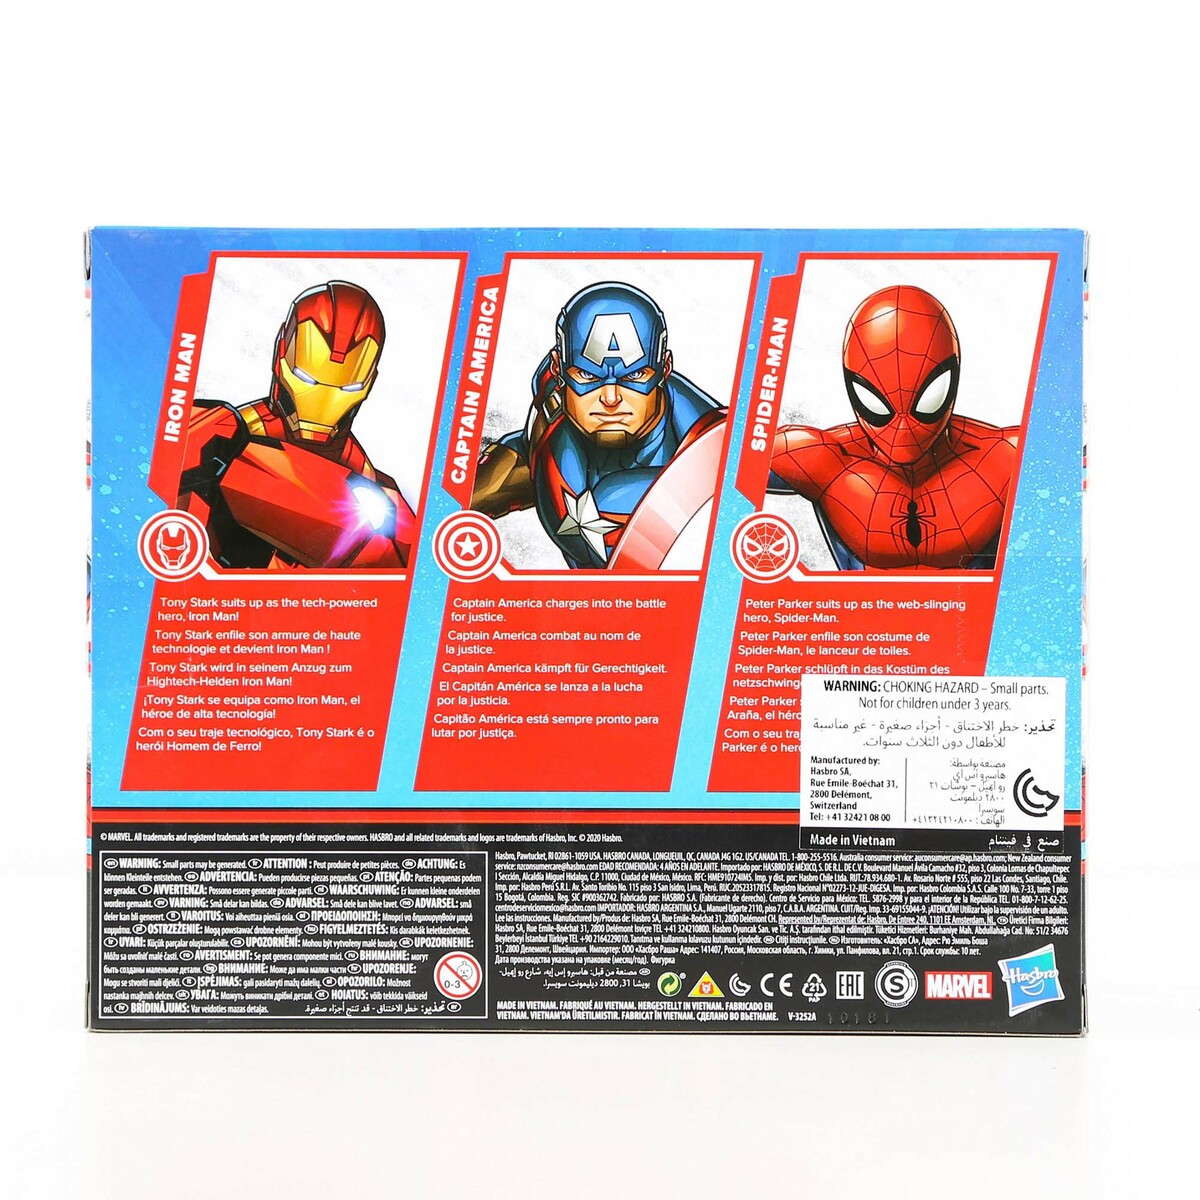 Marvel Action Figure Toy 3-Pack, 6-inch Figures, Iron Man, Spider-Man, Captain America, F13945L